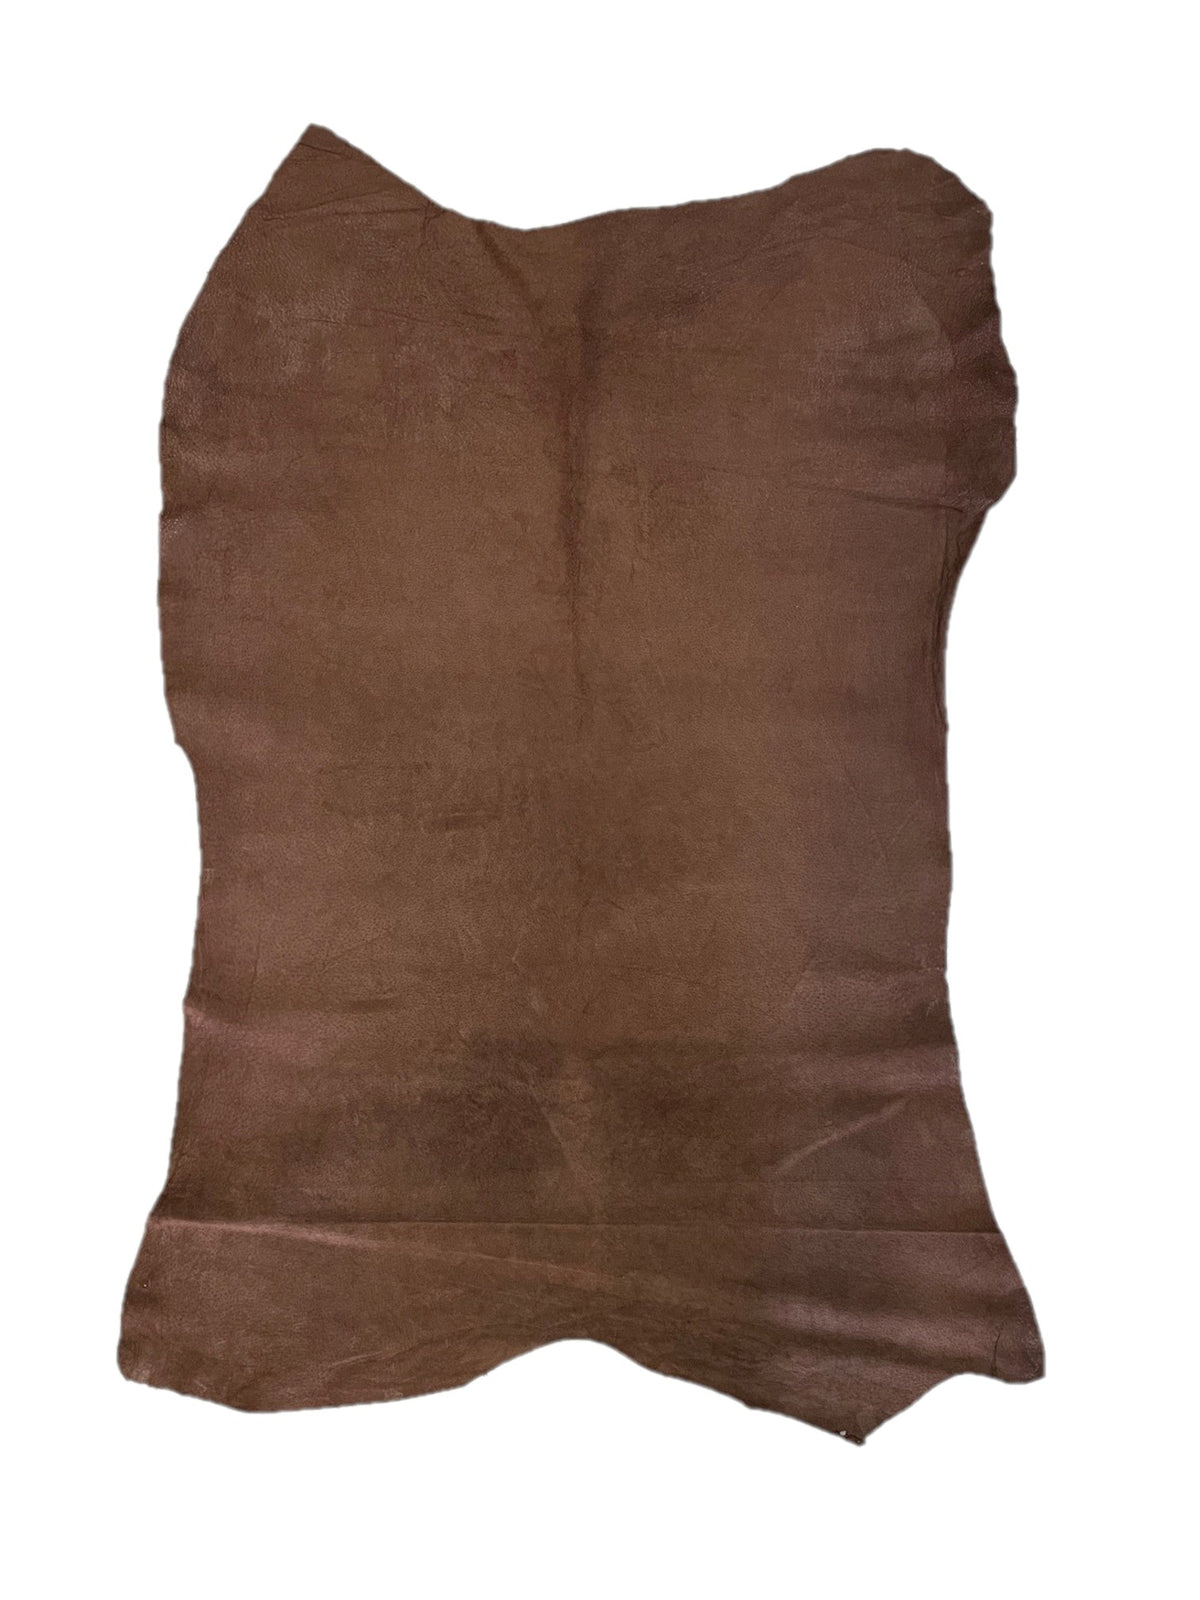 Pig Skin Suede | Brown | 0.6 mm | 8 sq.ft | From $25 ea.